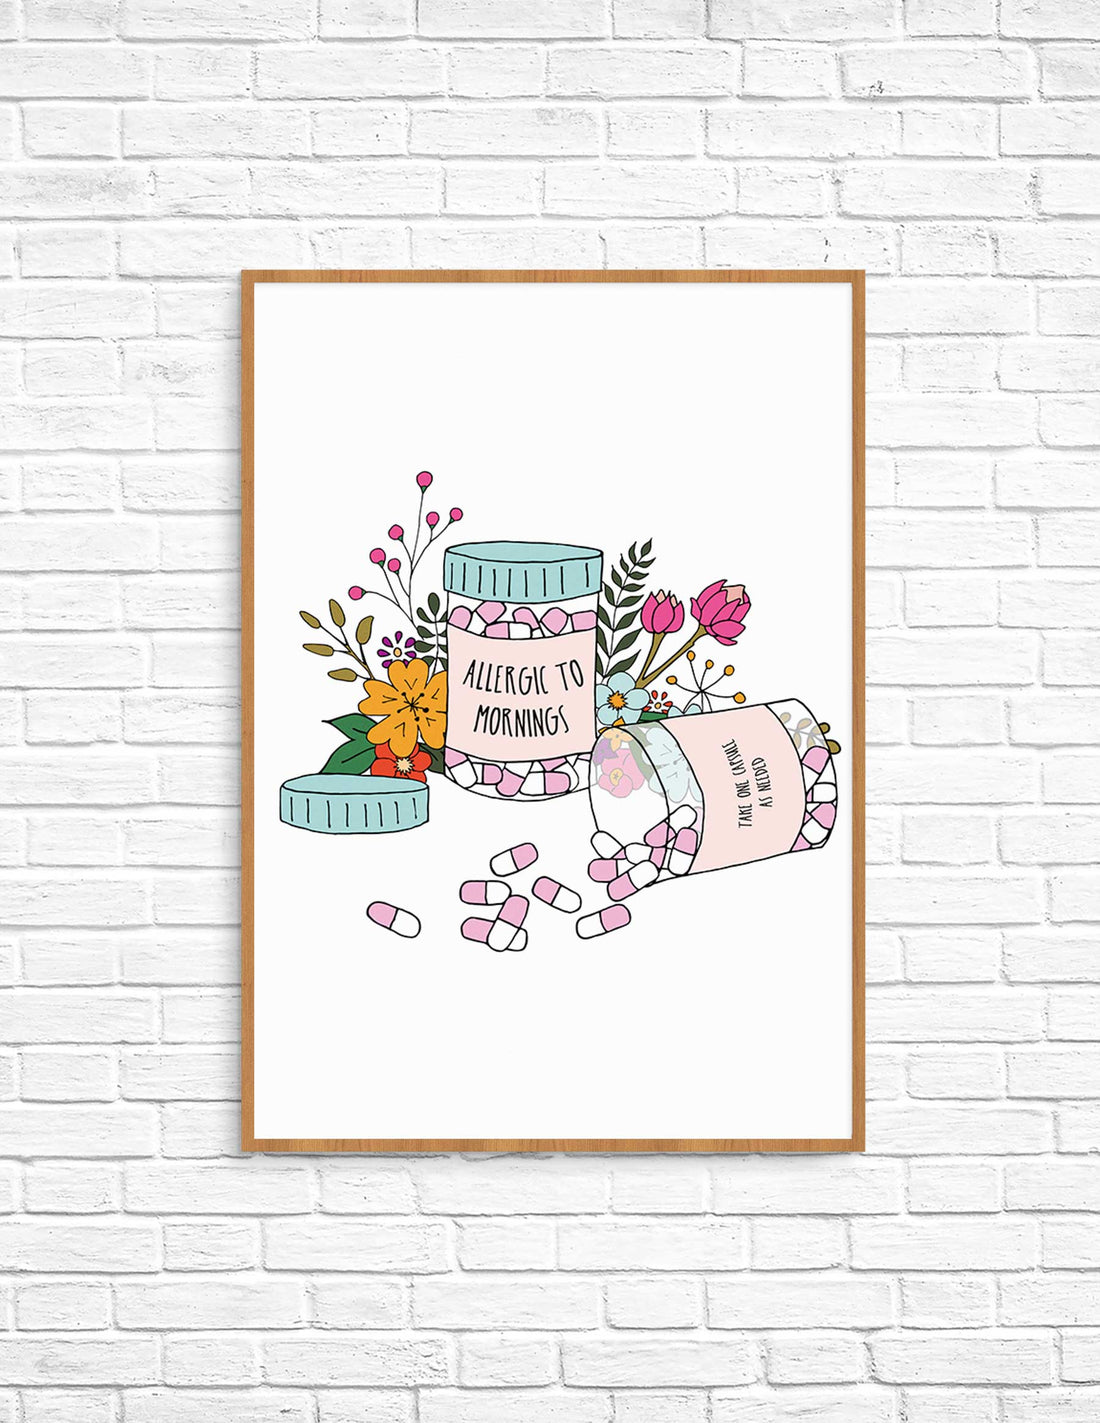 Allergic to mornings printable wall art